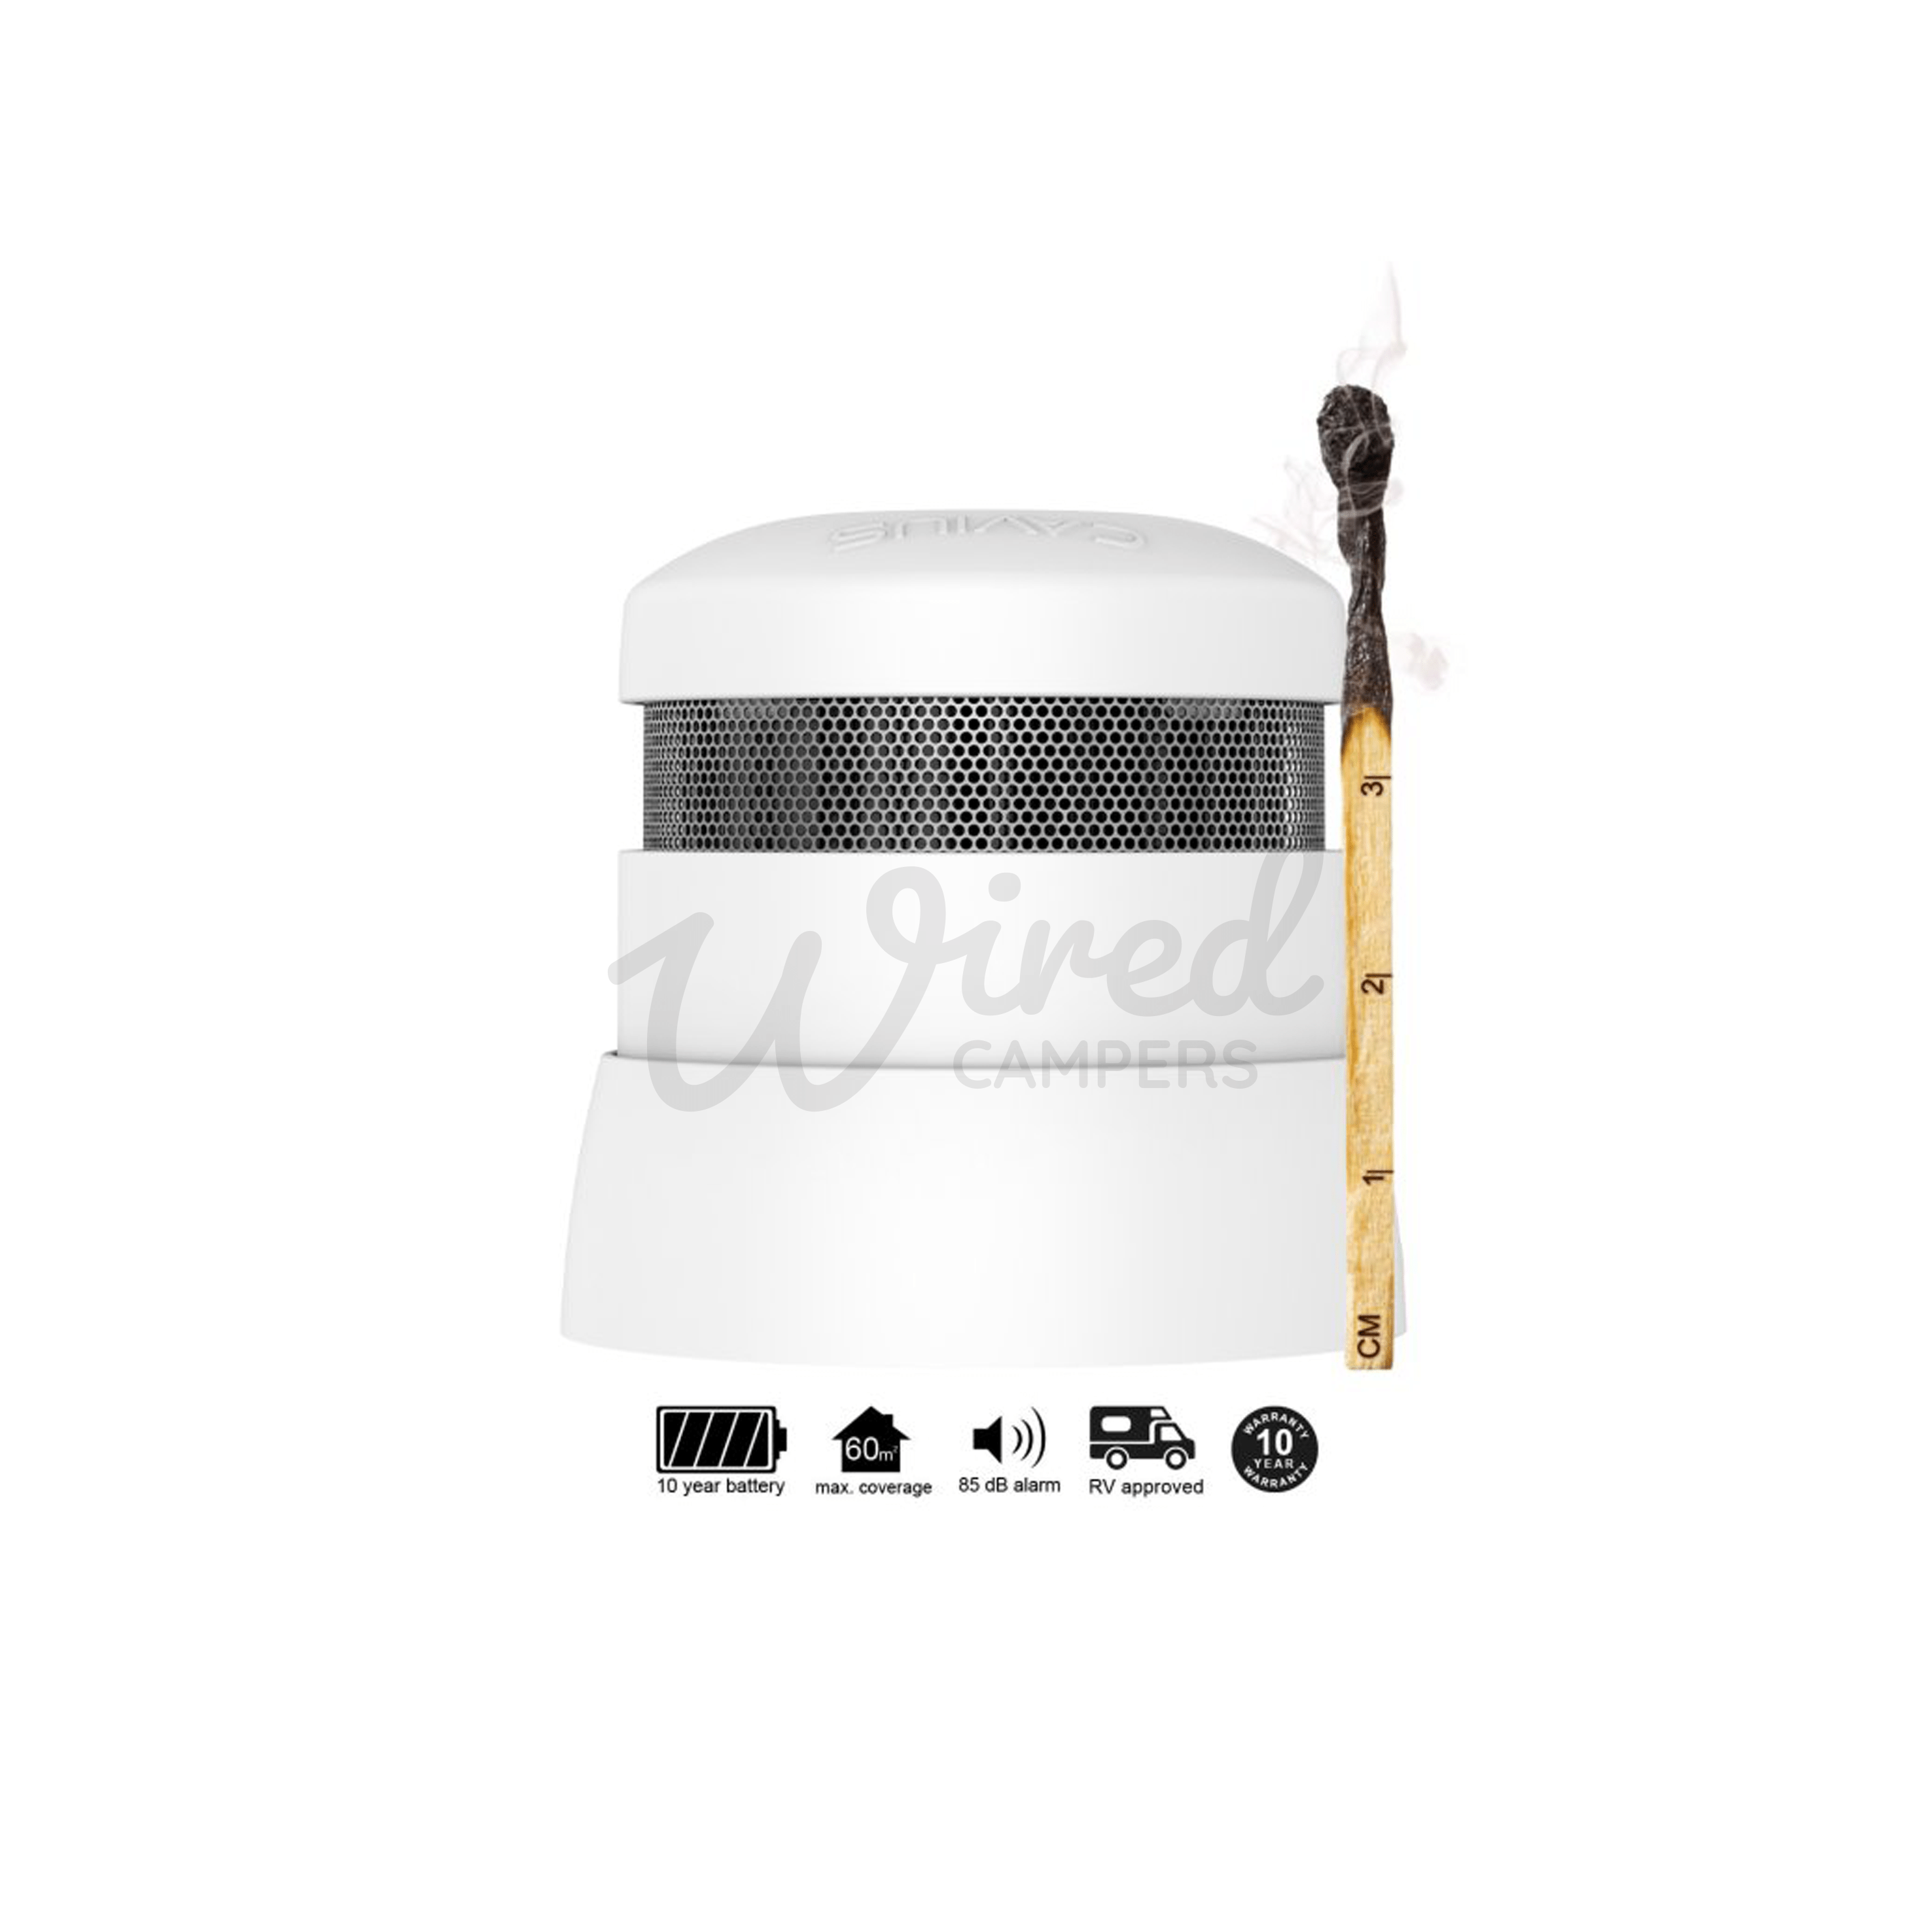 Wired Campers Limited KIDDE/CAVIUS Micro Design Smoke Alarm - Approved For Caravans/RV Use